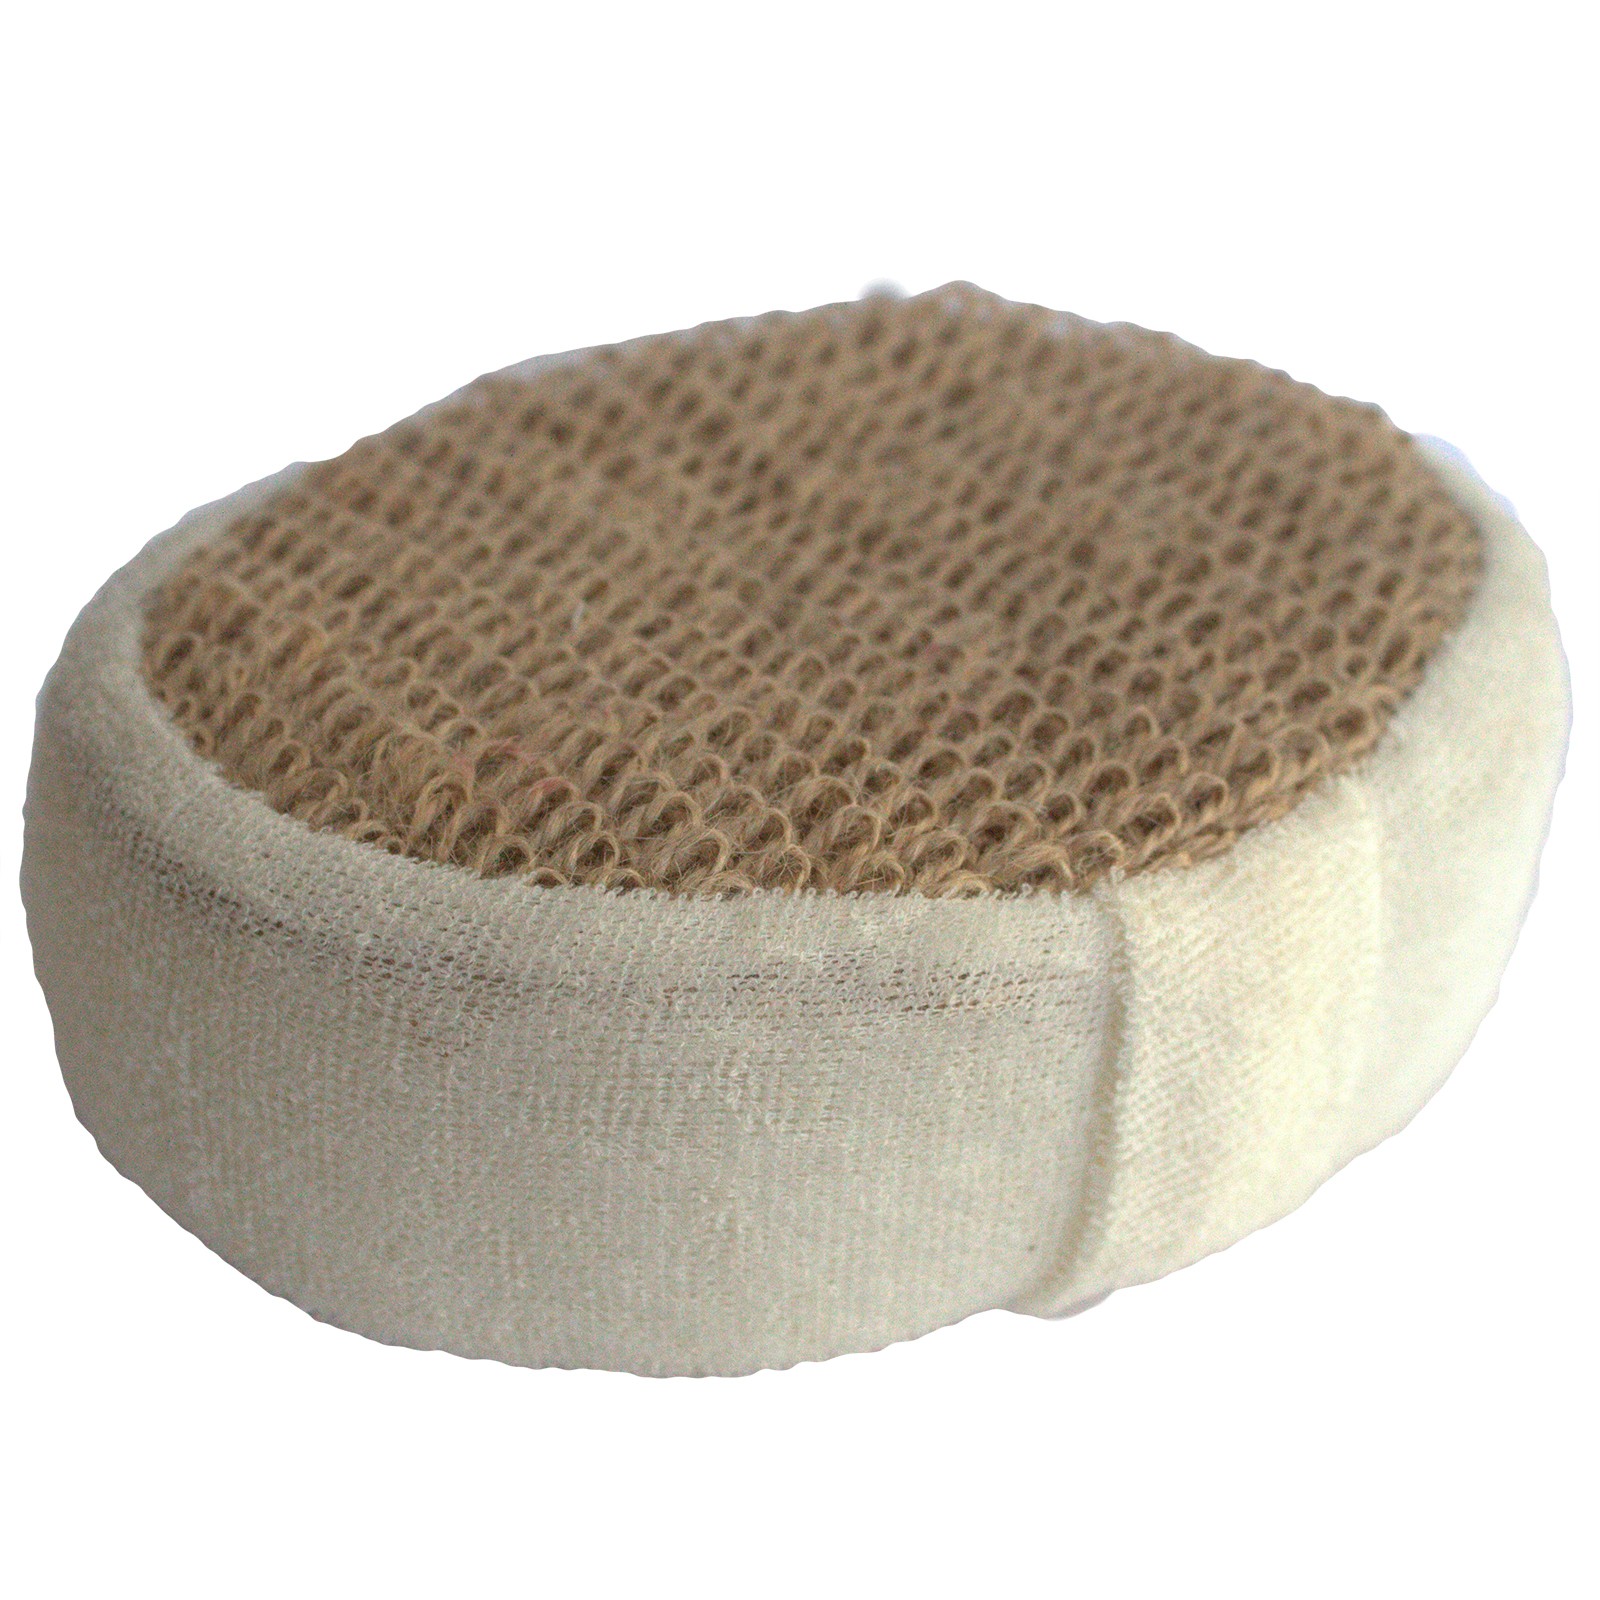 Luxury Sponge - Brown - AW Dropship - Your Giftware and Aromatherapy ...